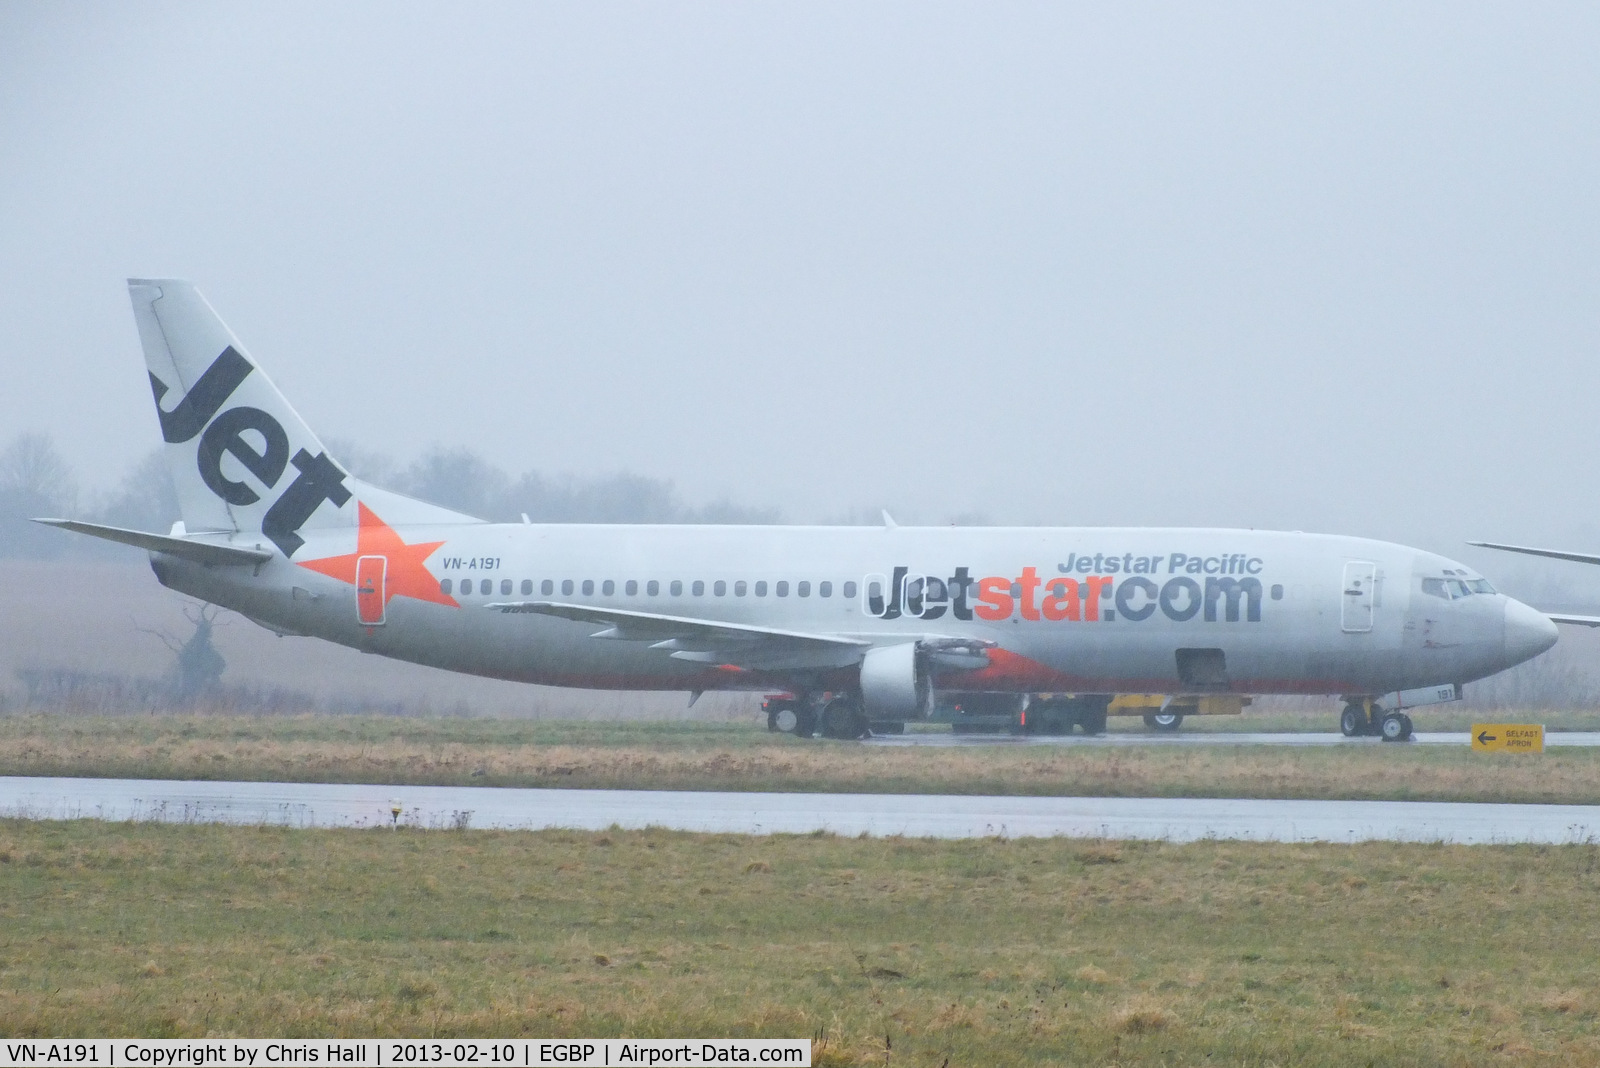 VN-A191, 1994 Boeing 737-4H6 C/N 27306, ex Jetstar Pacific Airlines B737 due to be scrapped bt ASI at Kemble